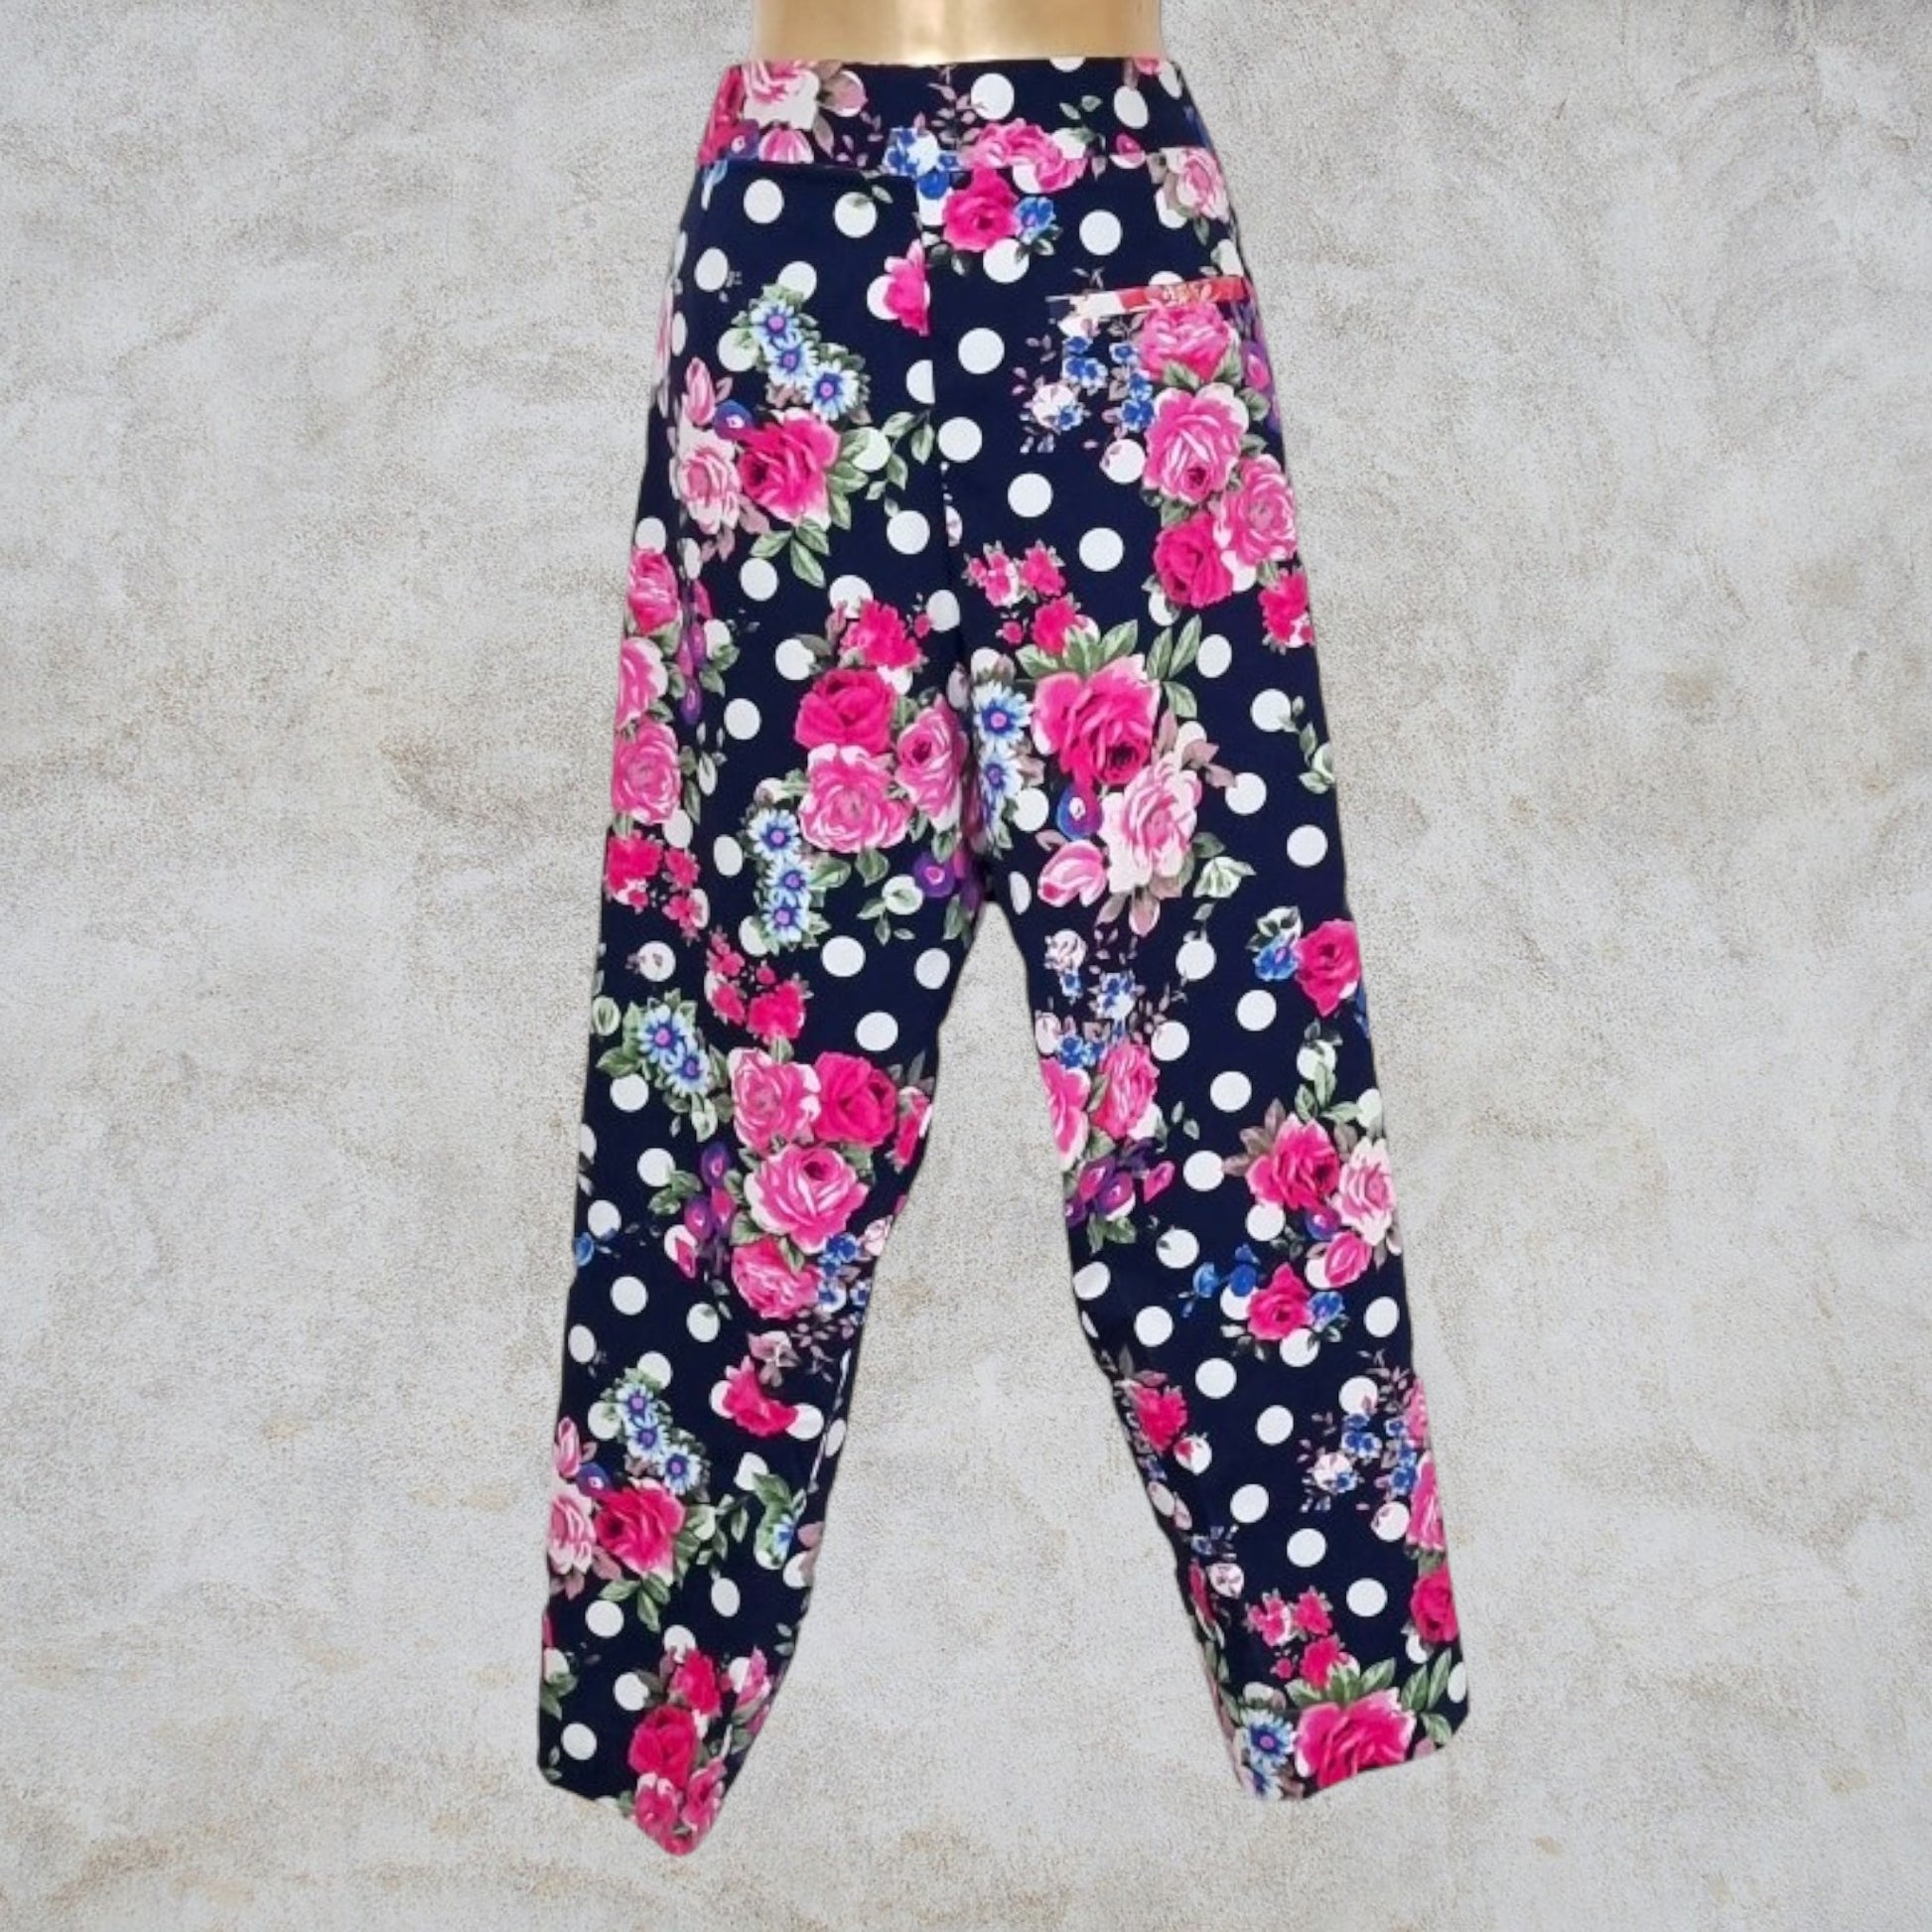 Pomodoro Navy Floral Summer Floral Ankle Length Pants. UK 18 US 14 EU 46 Timeless Fashions